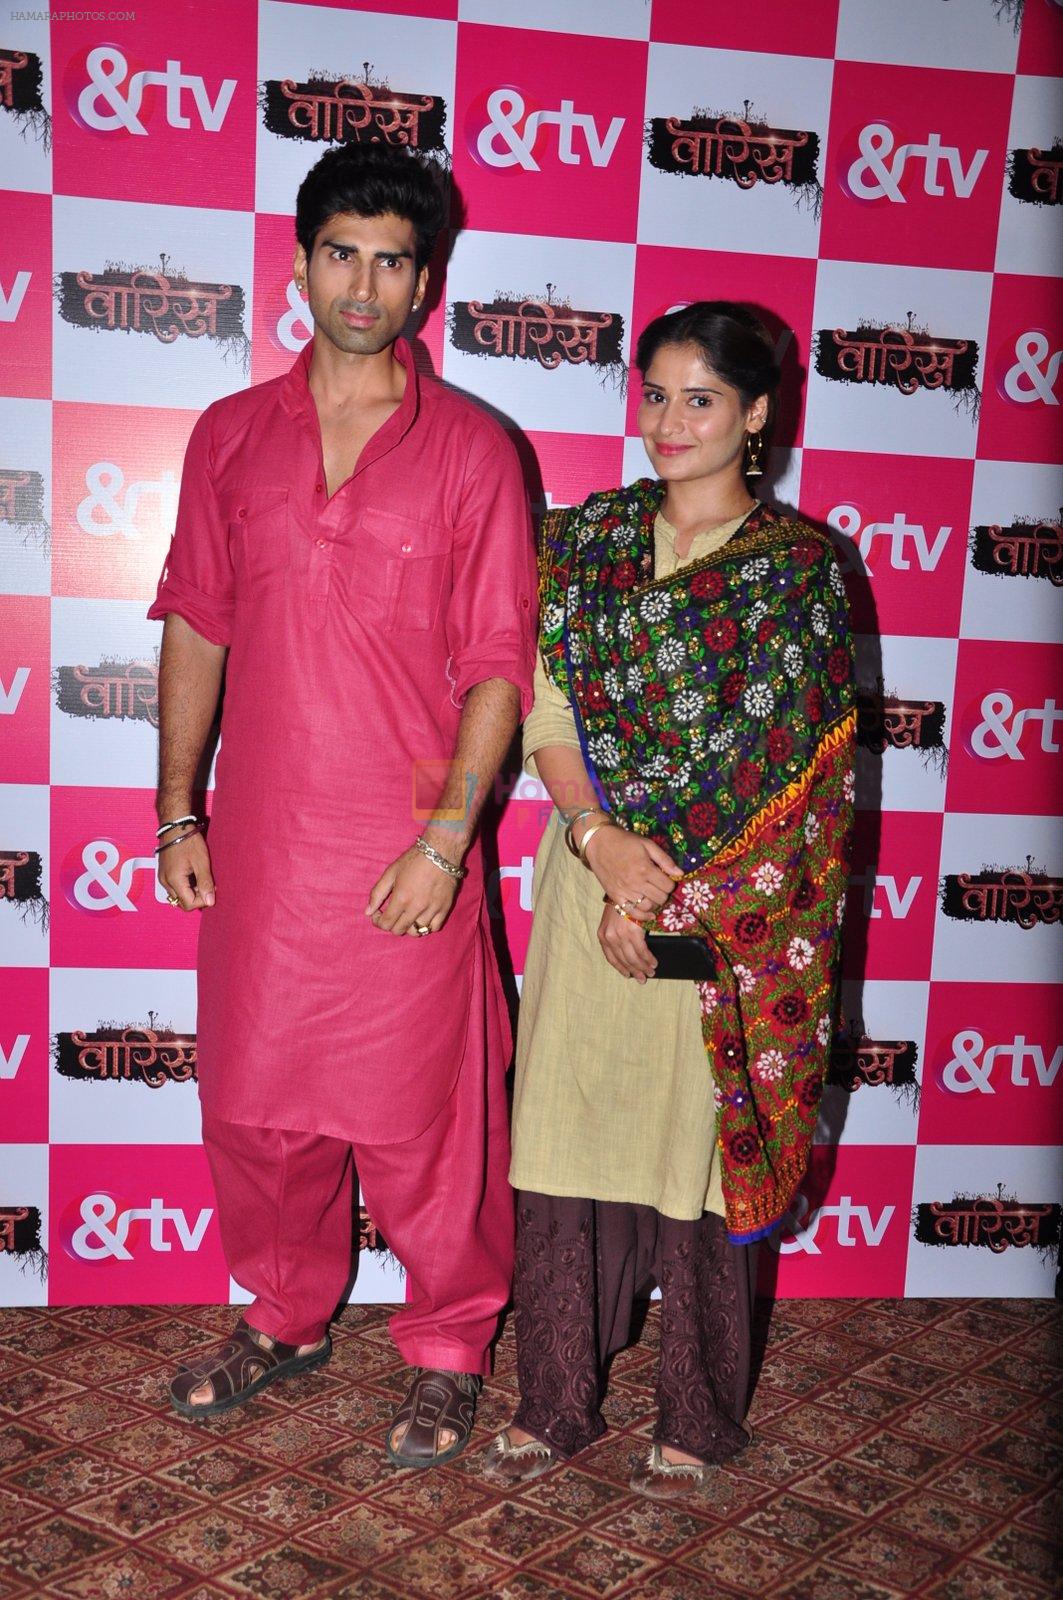 Mohammed Iqbal Khan and Aarti Singh at Waris TV serial launch on 22nd June 2016